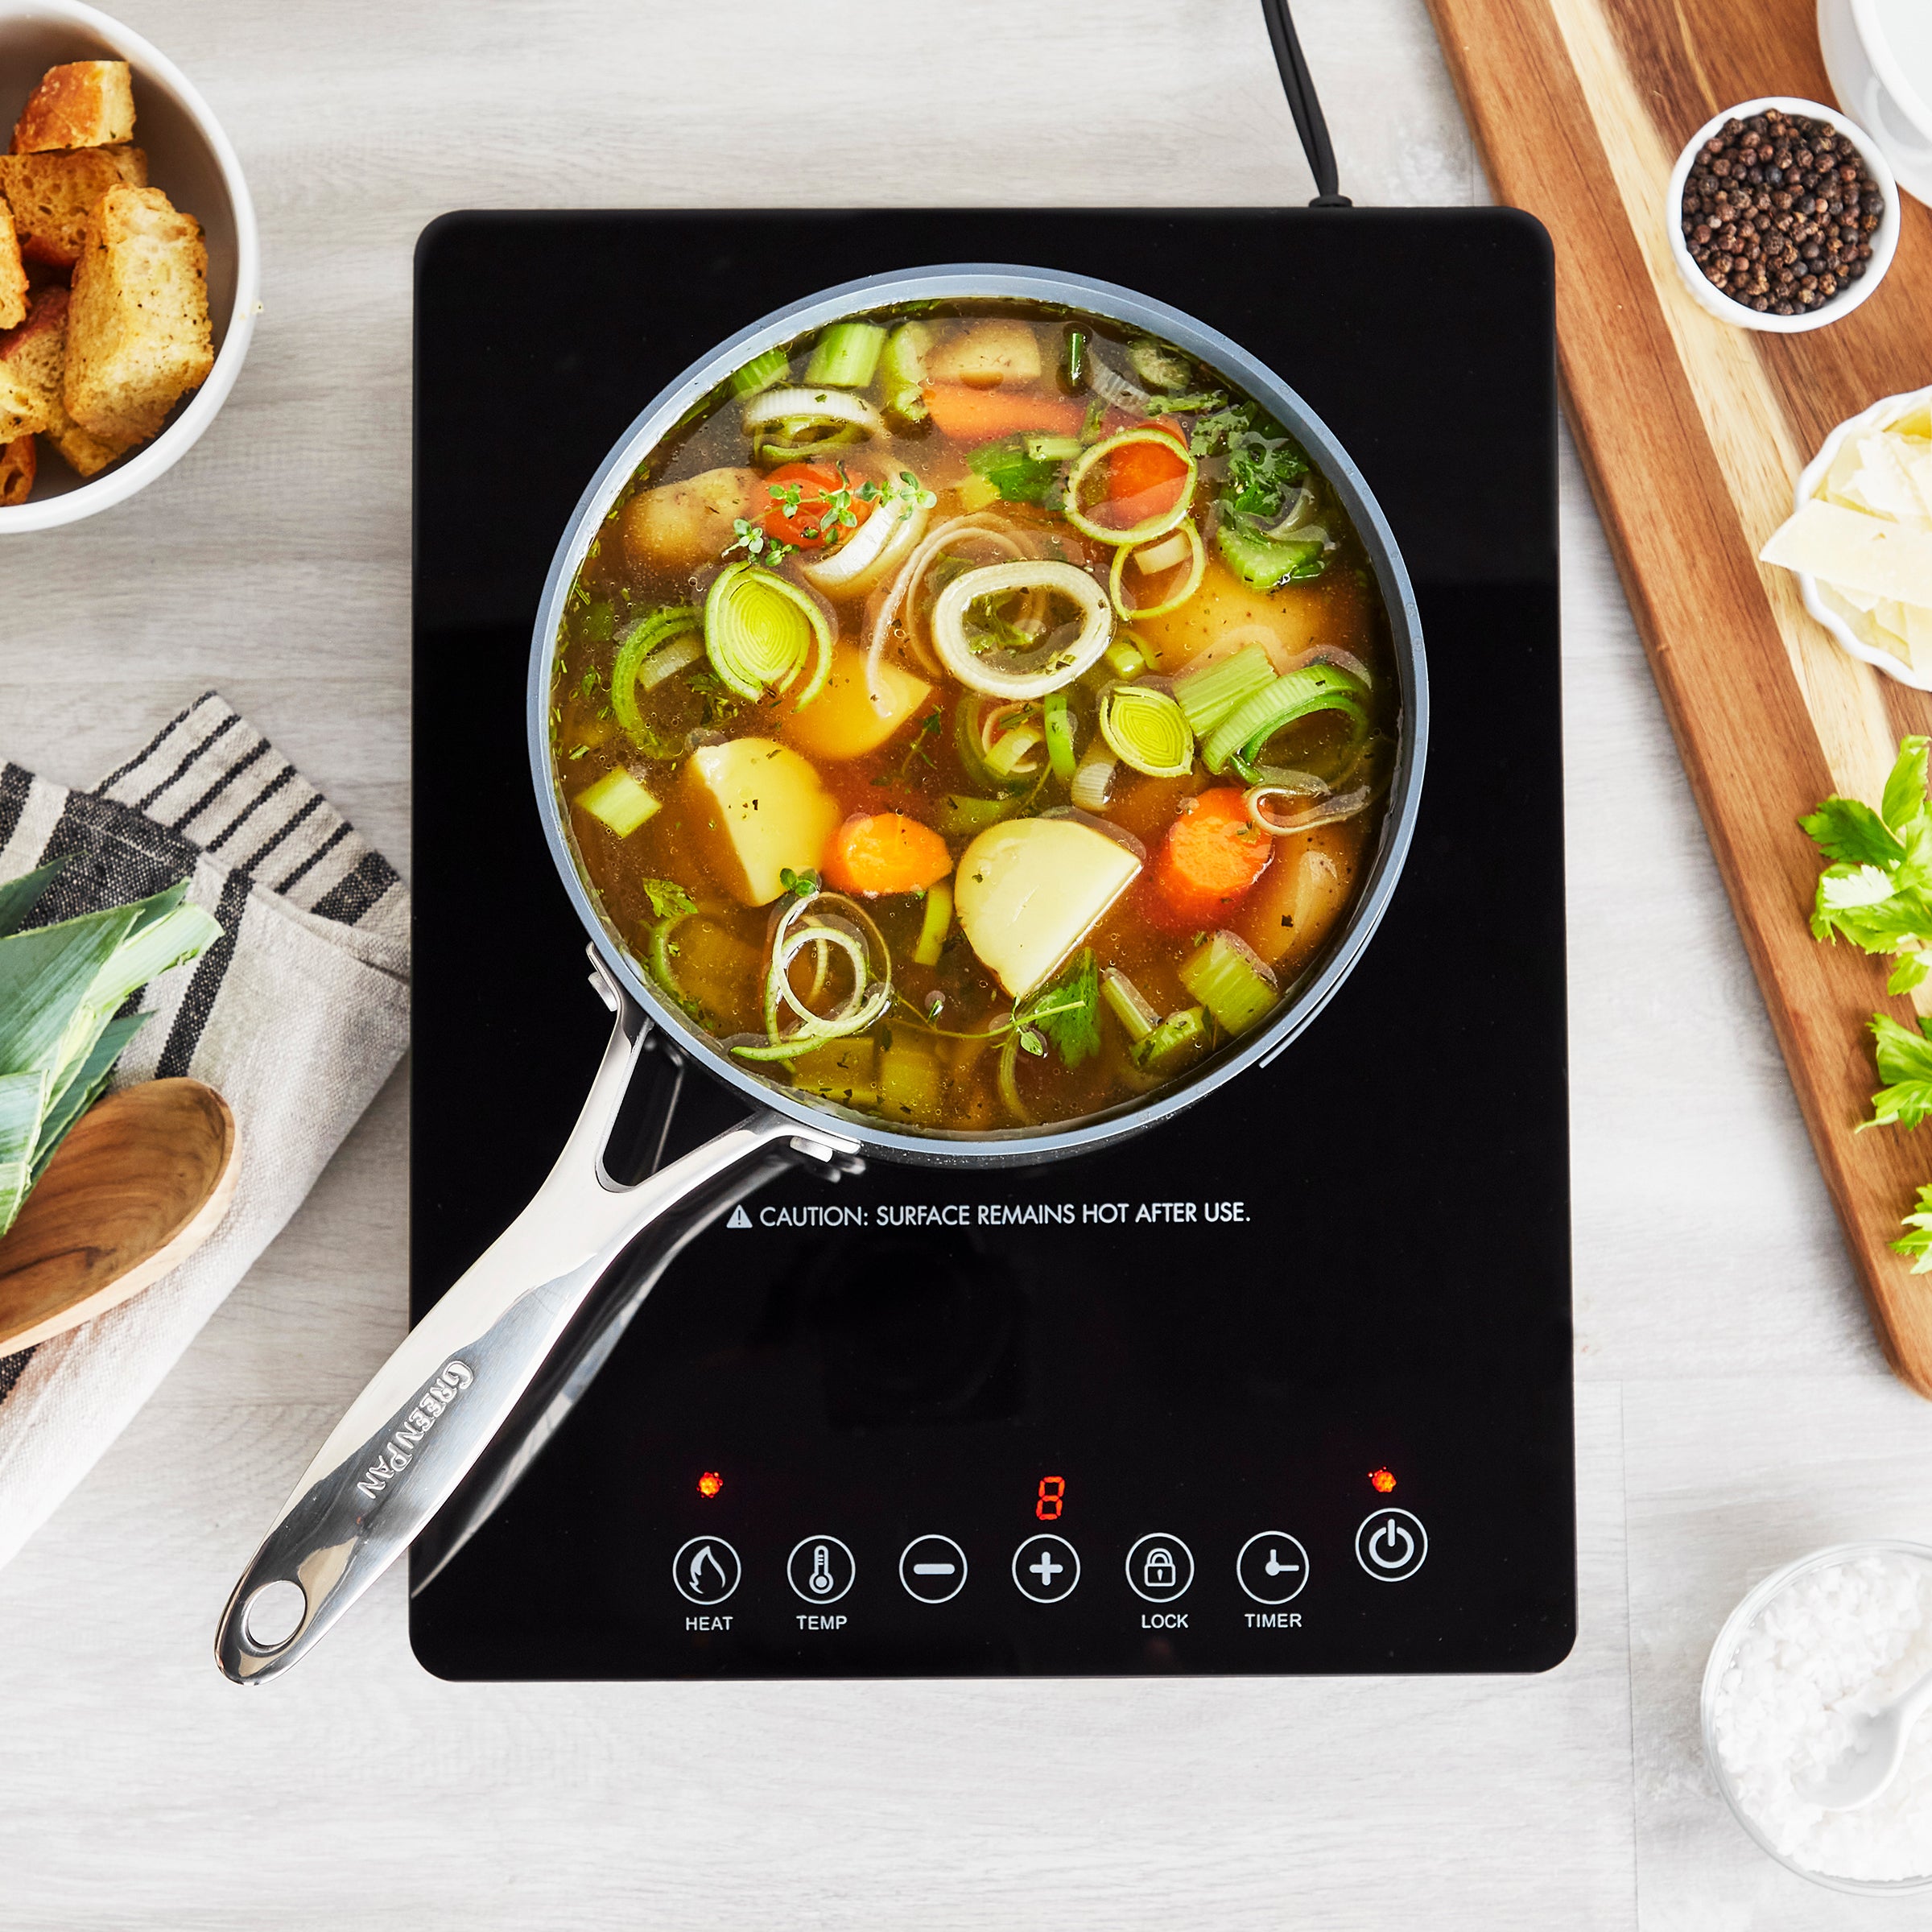 GreenPan Awarded Best Eco-Friendly Induction Cookware